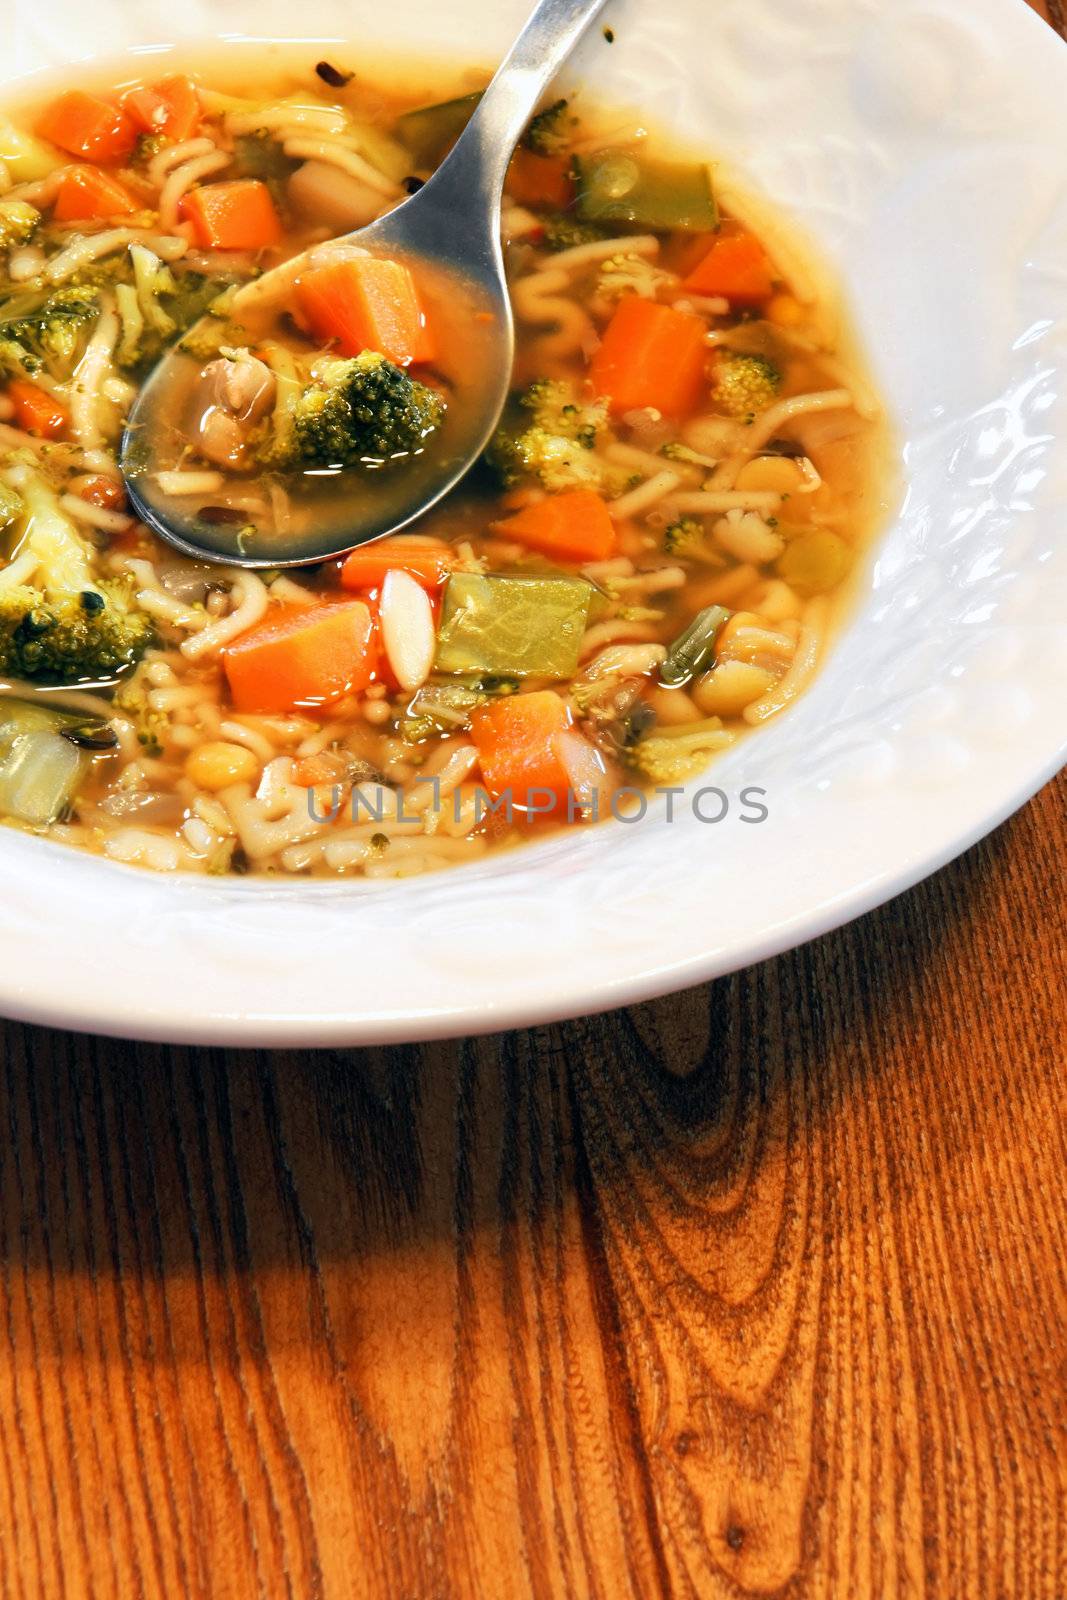 Good hearty homemade vegetable soup served in textured white bowl on wooden kitchen table.